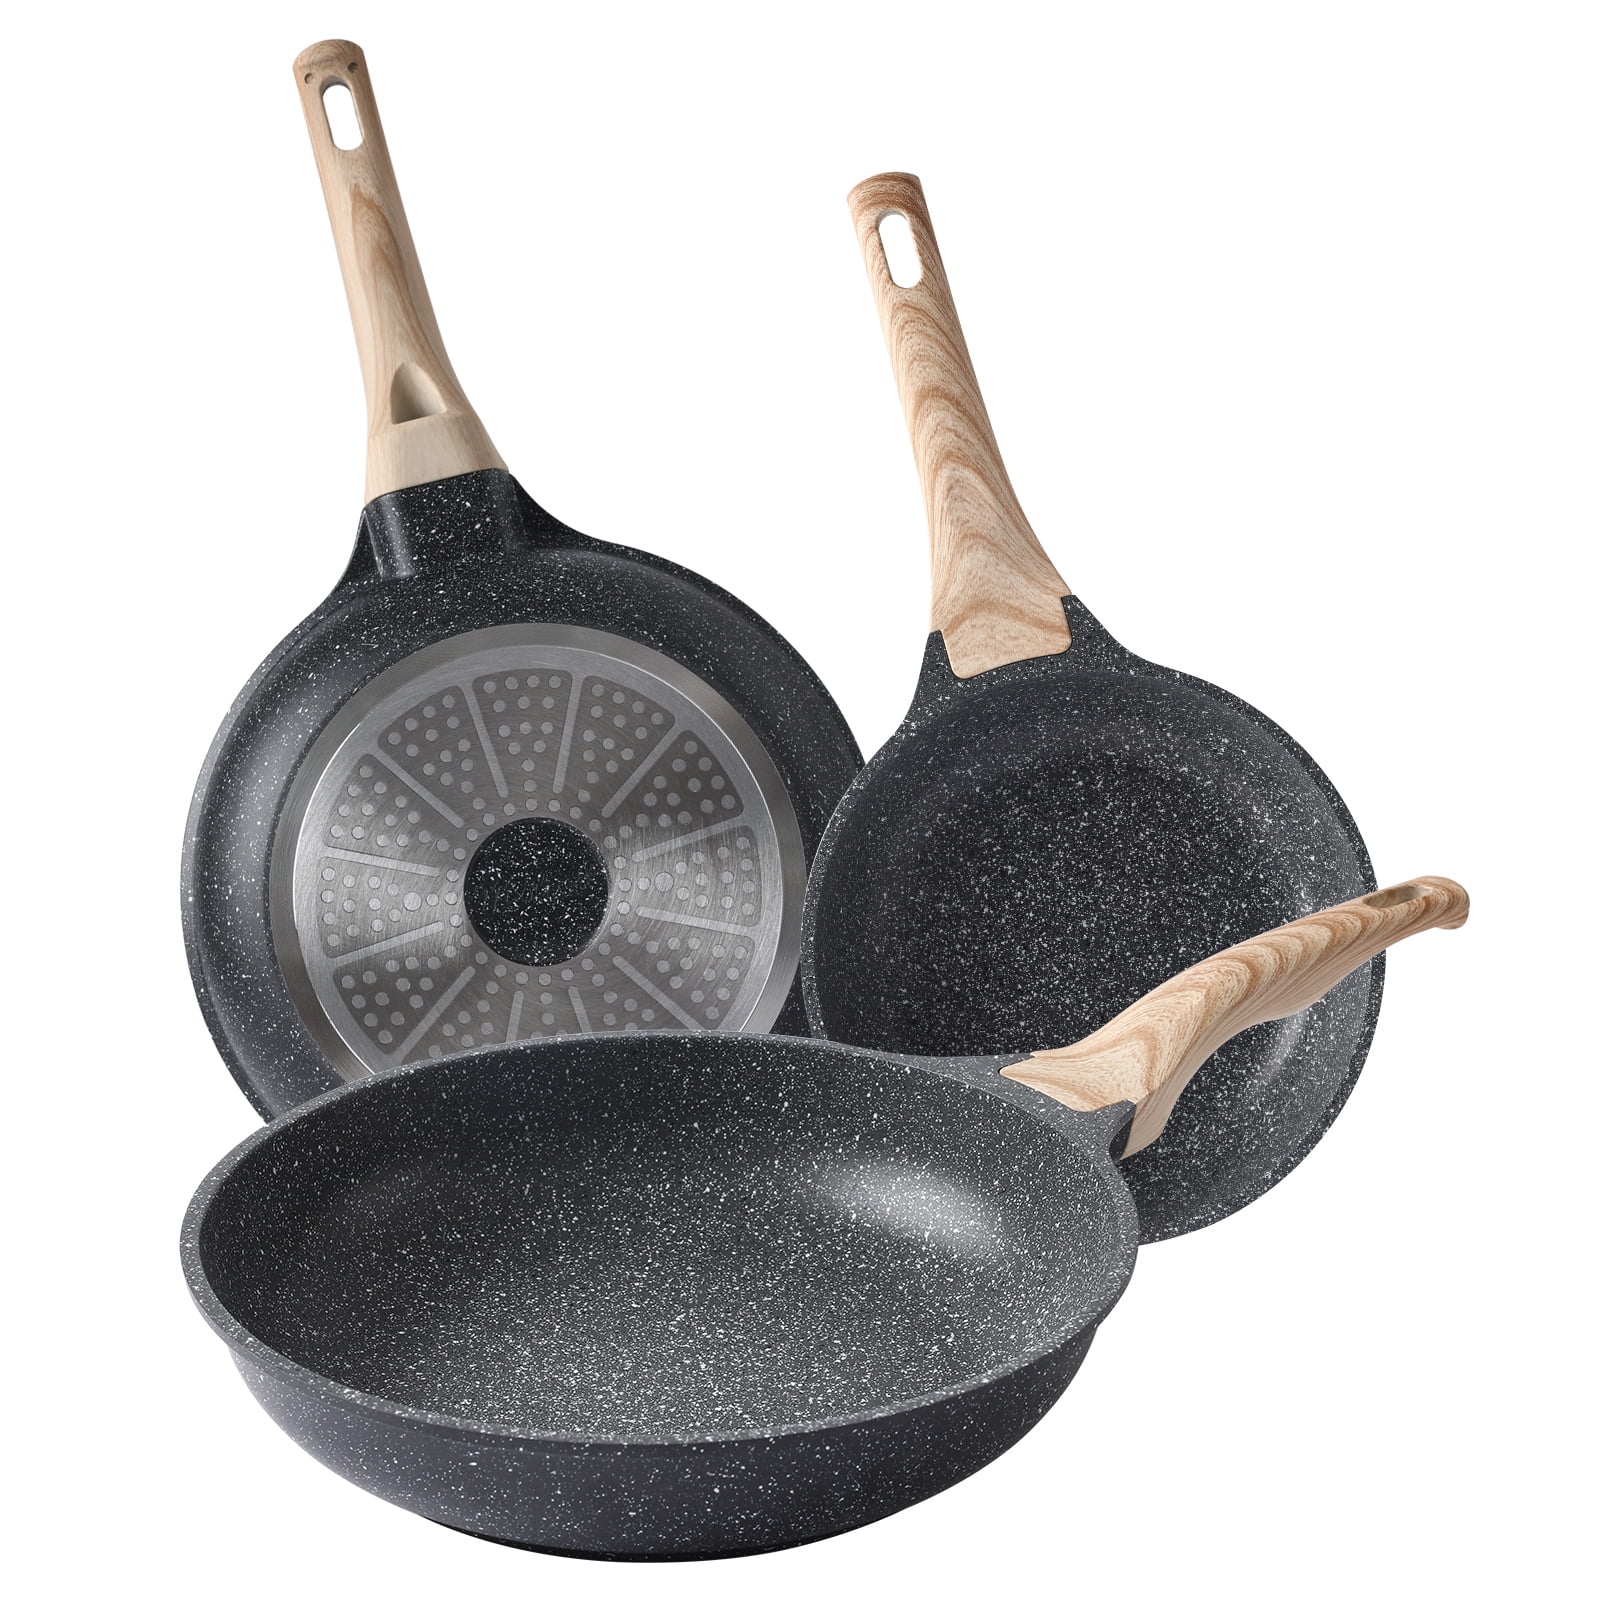  Frying Pan Frying Pans Set,3-Piece Non-Stick Kitchen Cookware  Set,100% Without APEO & PFOA,Wok and Stockpot,Special for Gas,2 Color  (Color : A): Home & Kitchen